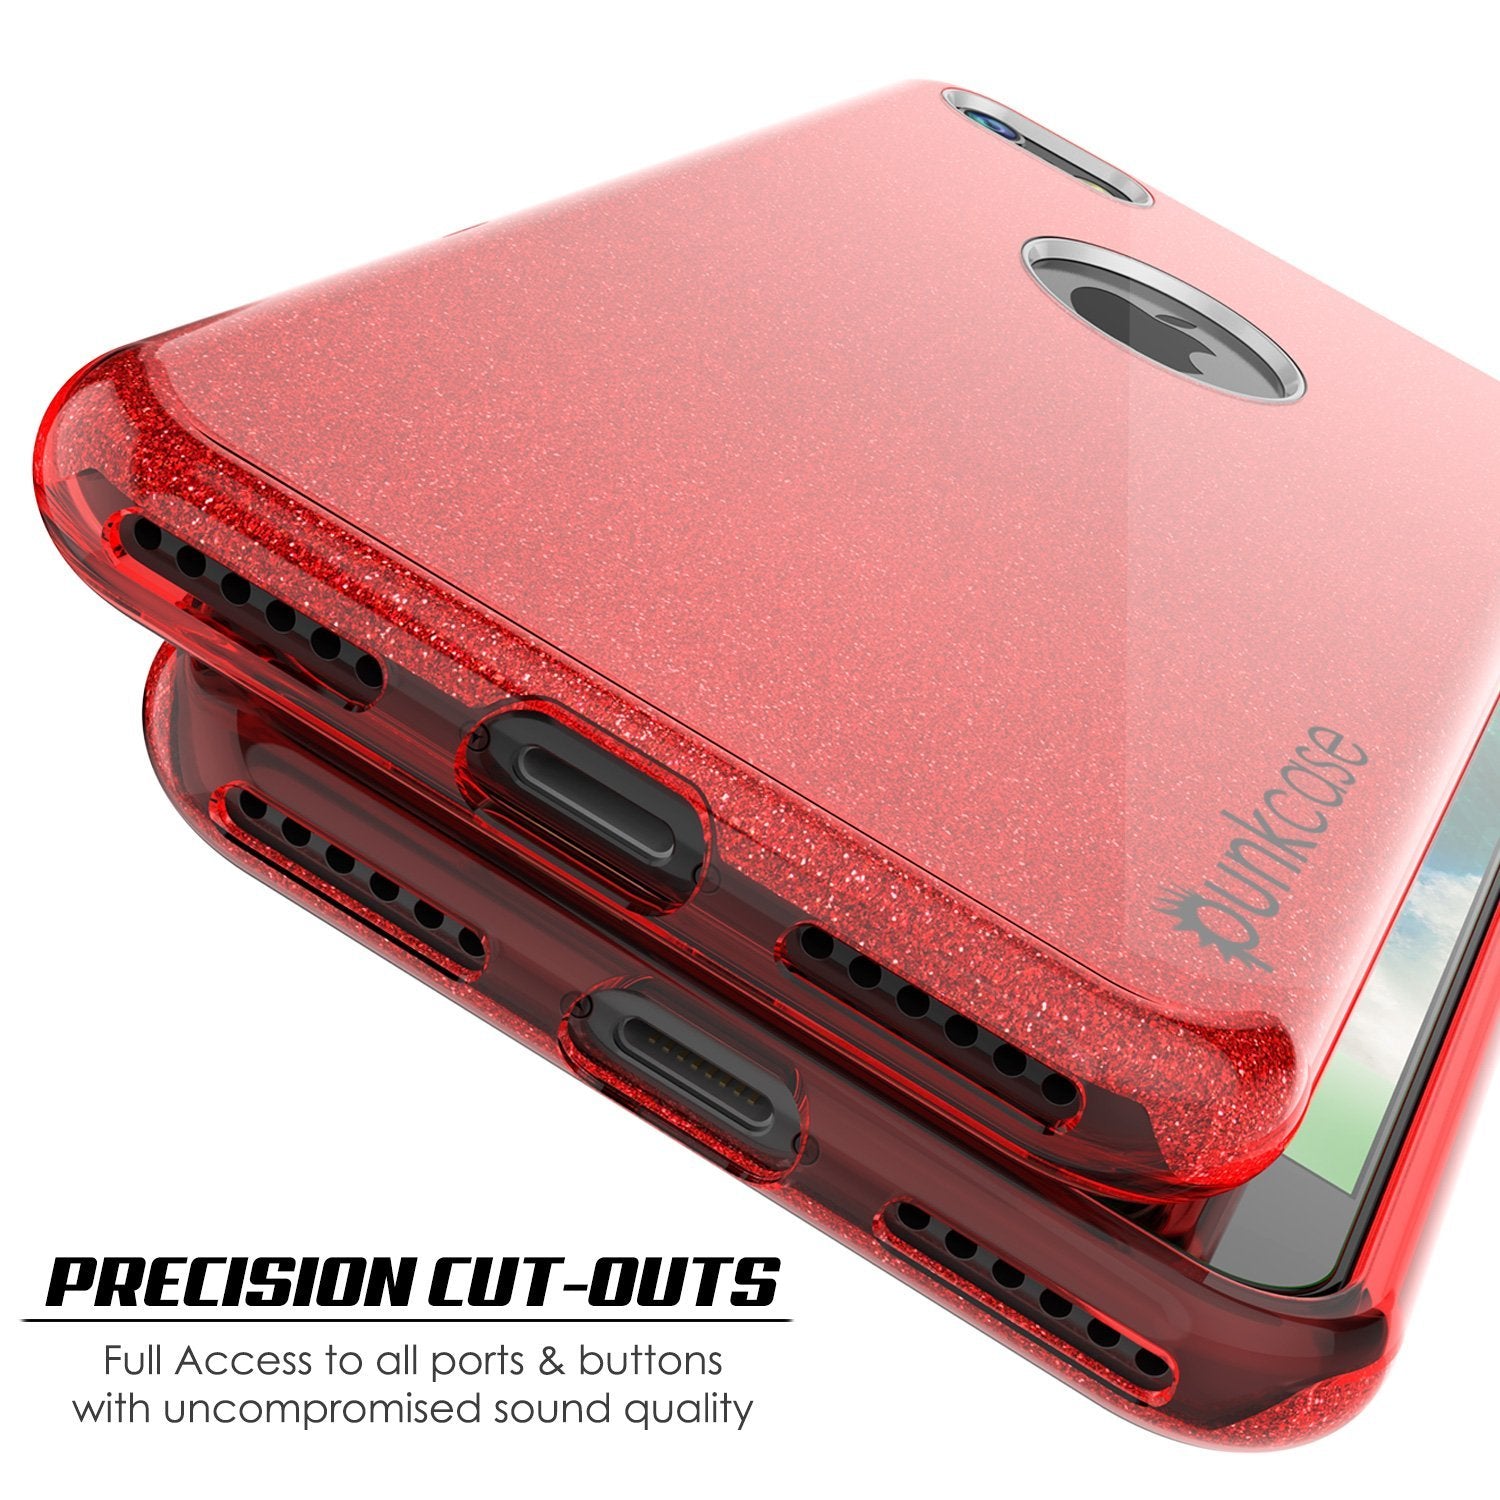 iPhone SE (4.7") Case, Punkcase Galactic 2.0 Series Ultra Slim Protective Armor TPU Cover [Red]